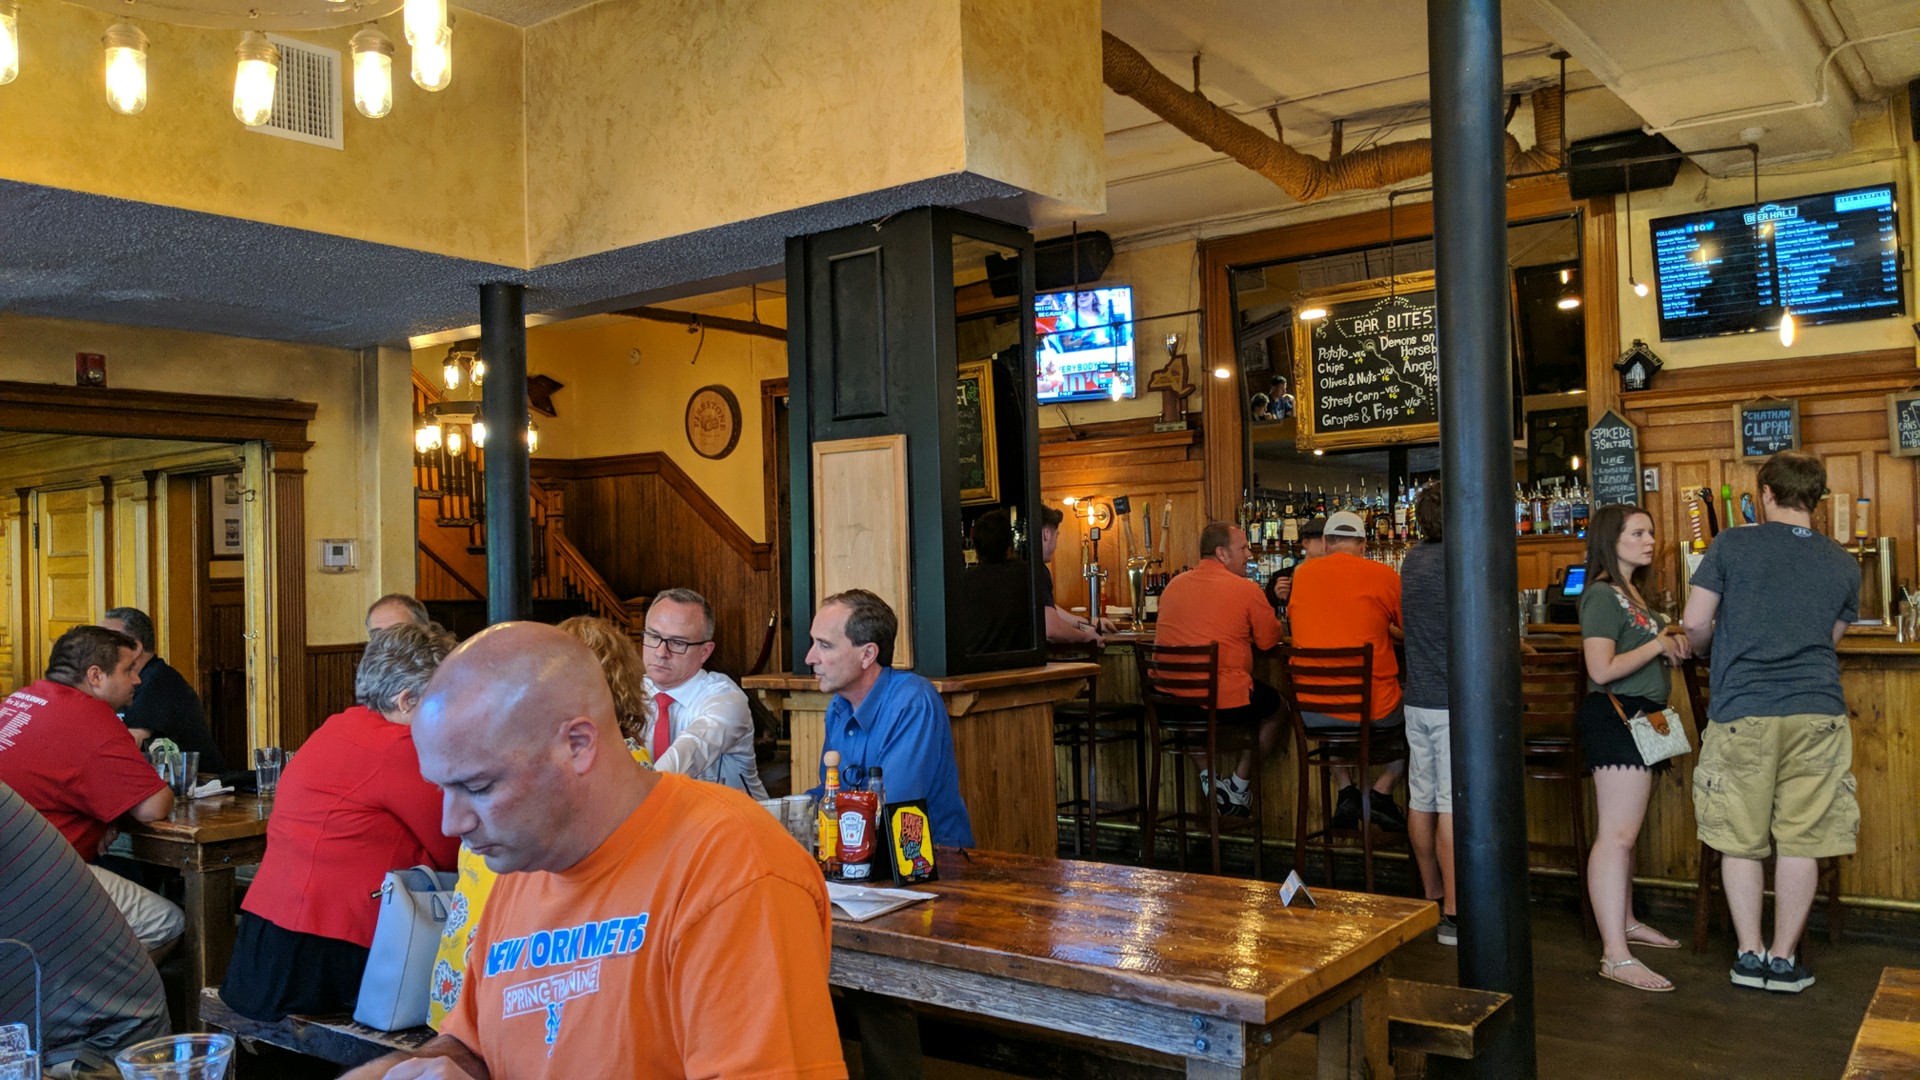 The City Beer Hall